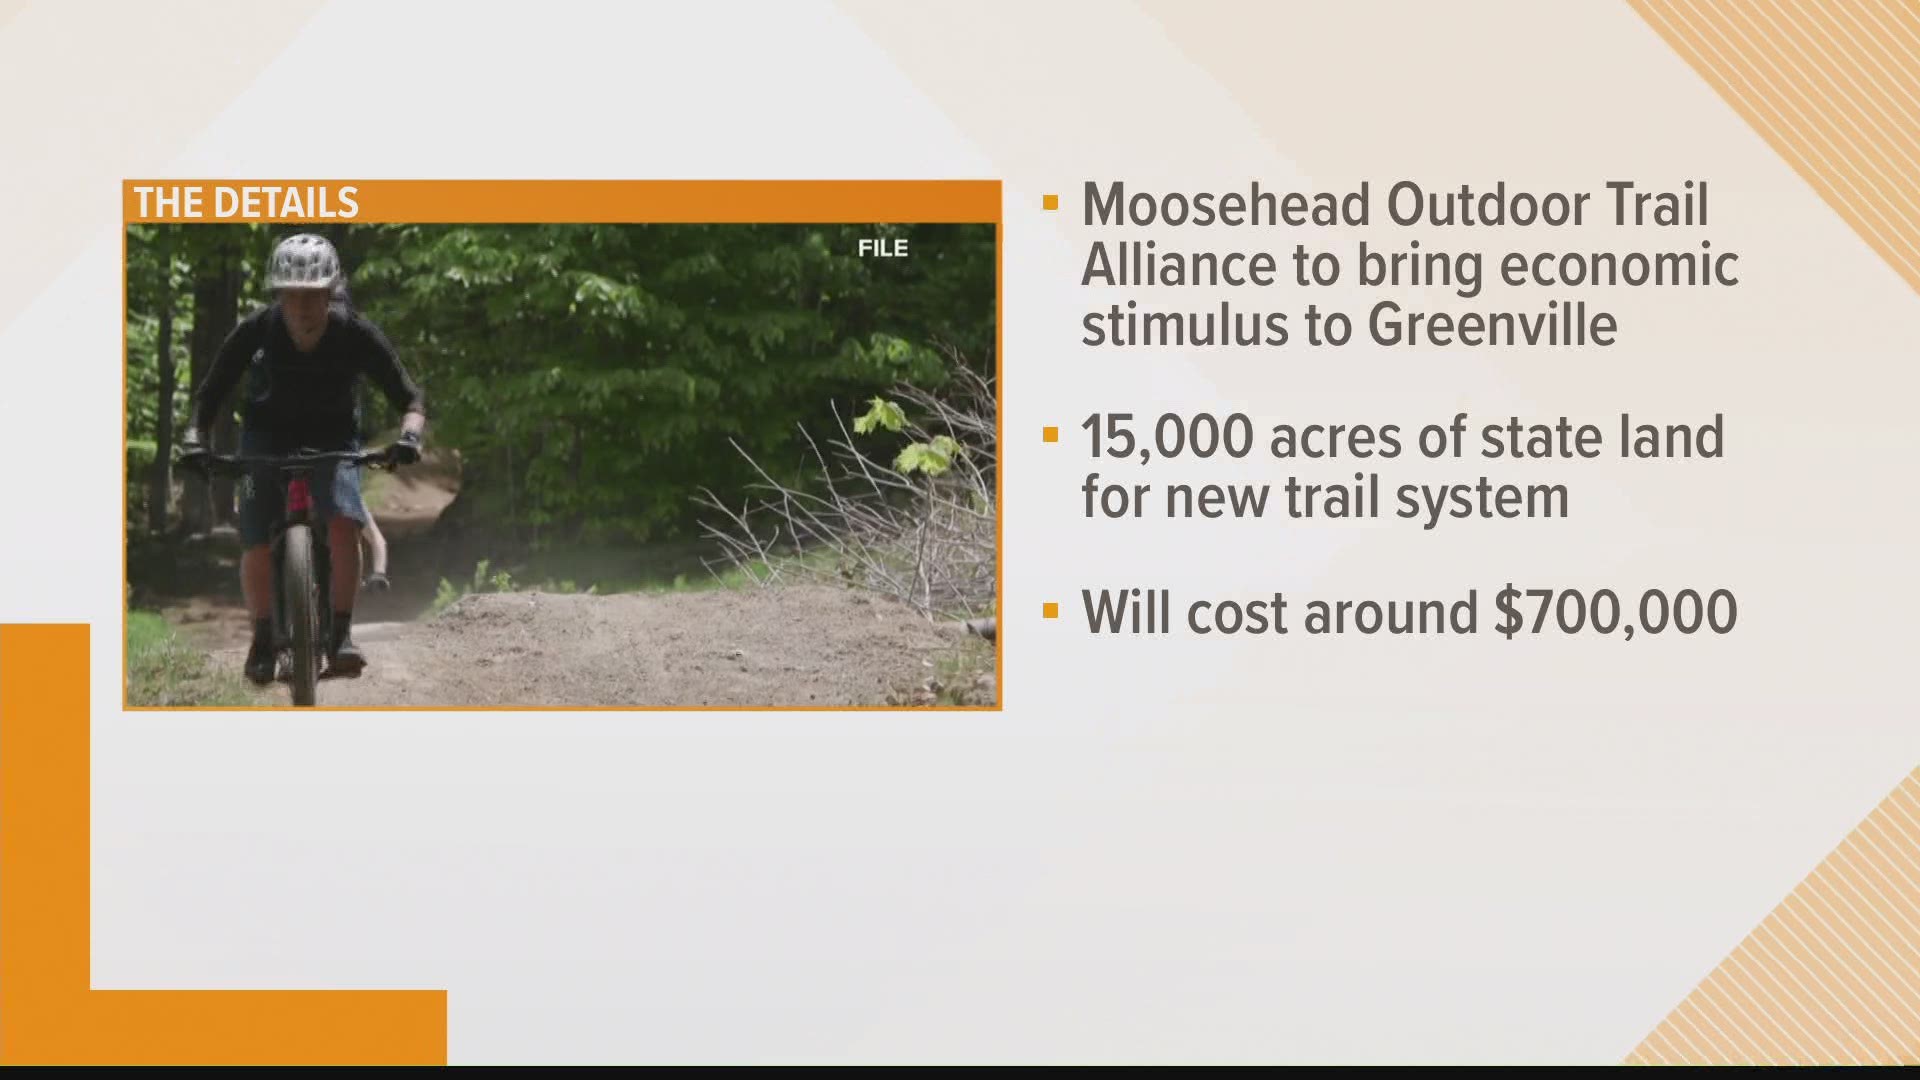 A nonprofit organization in Greenville plans to bring a mountain bike trail system to the Moosehead Lake area.